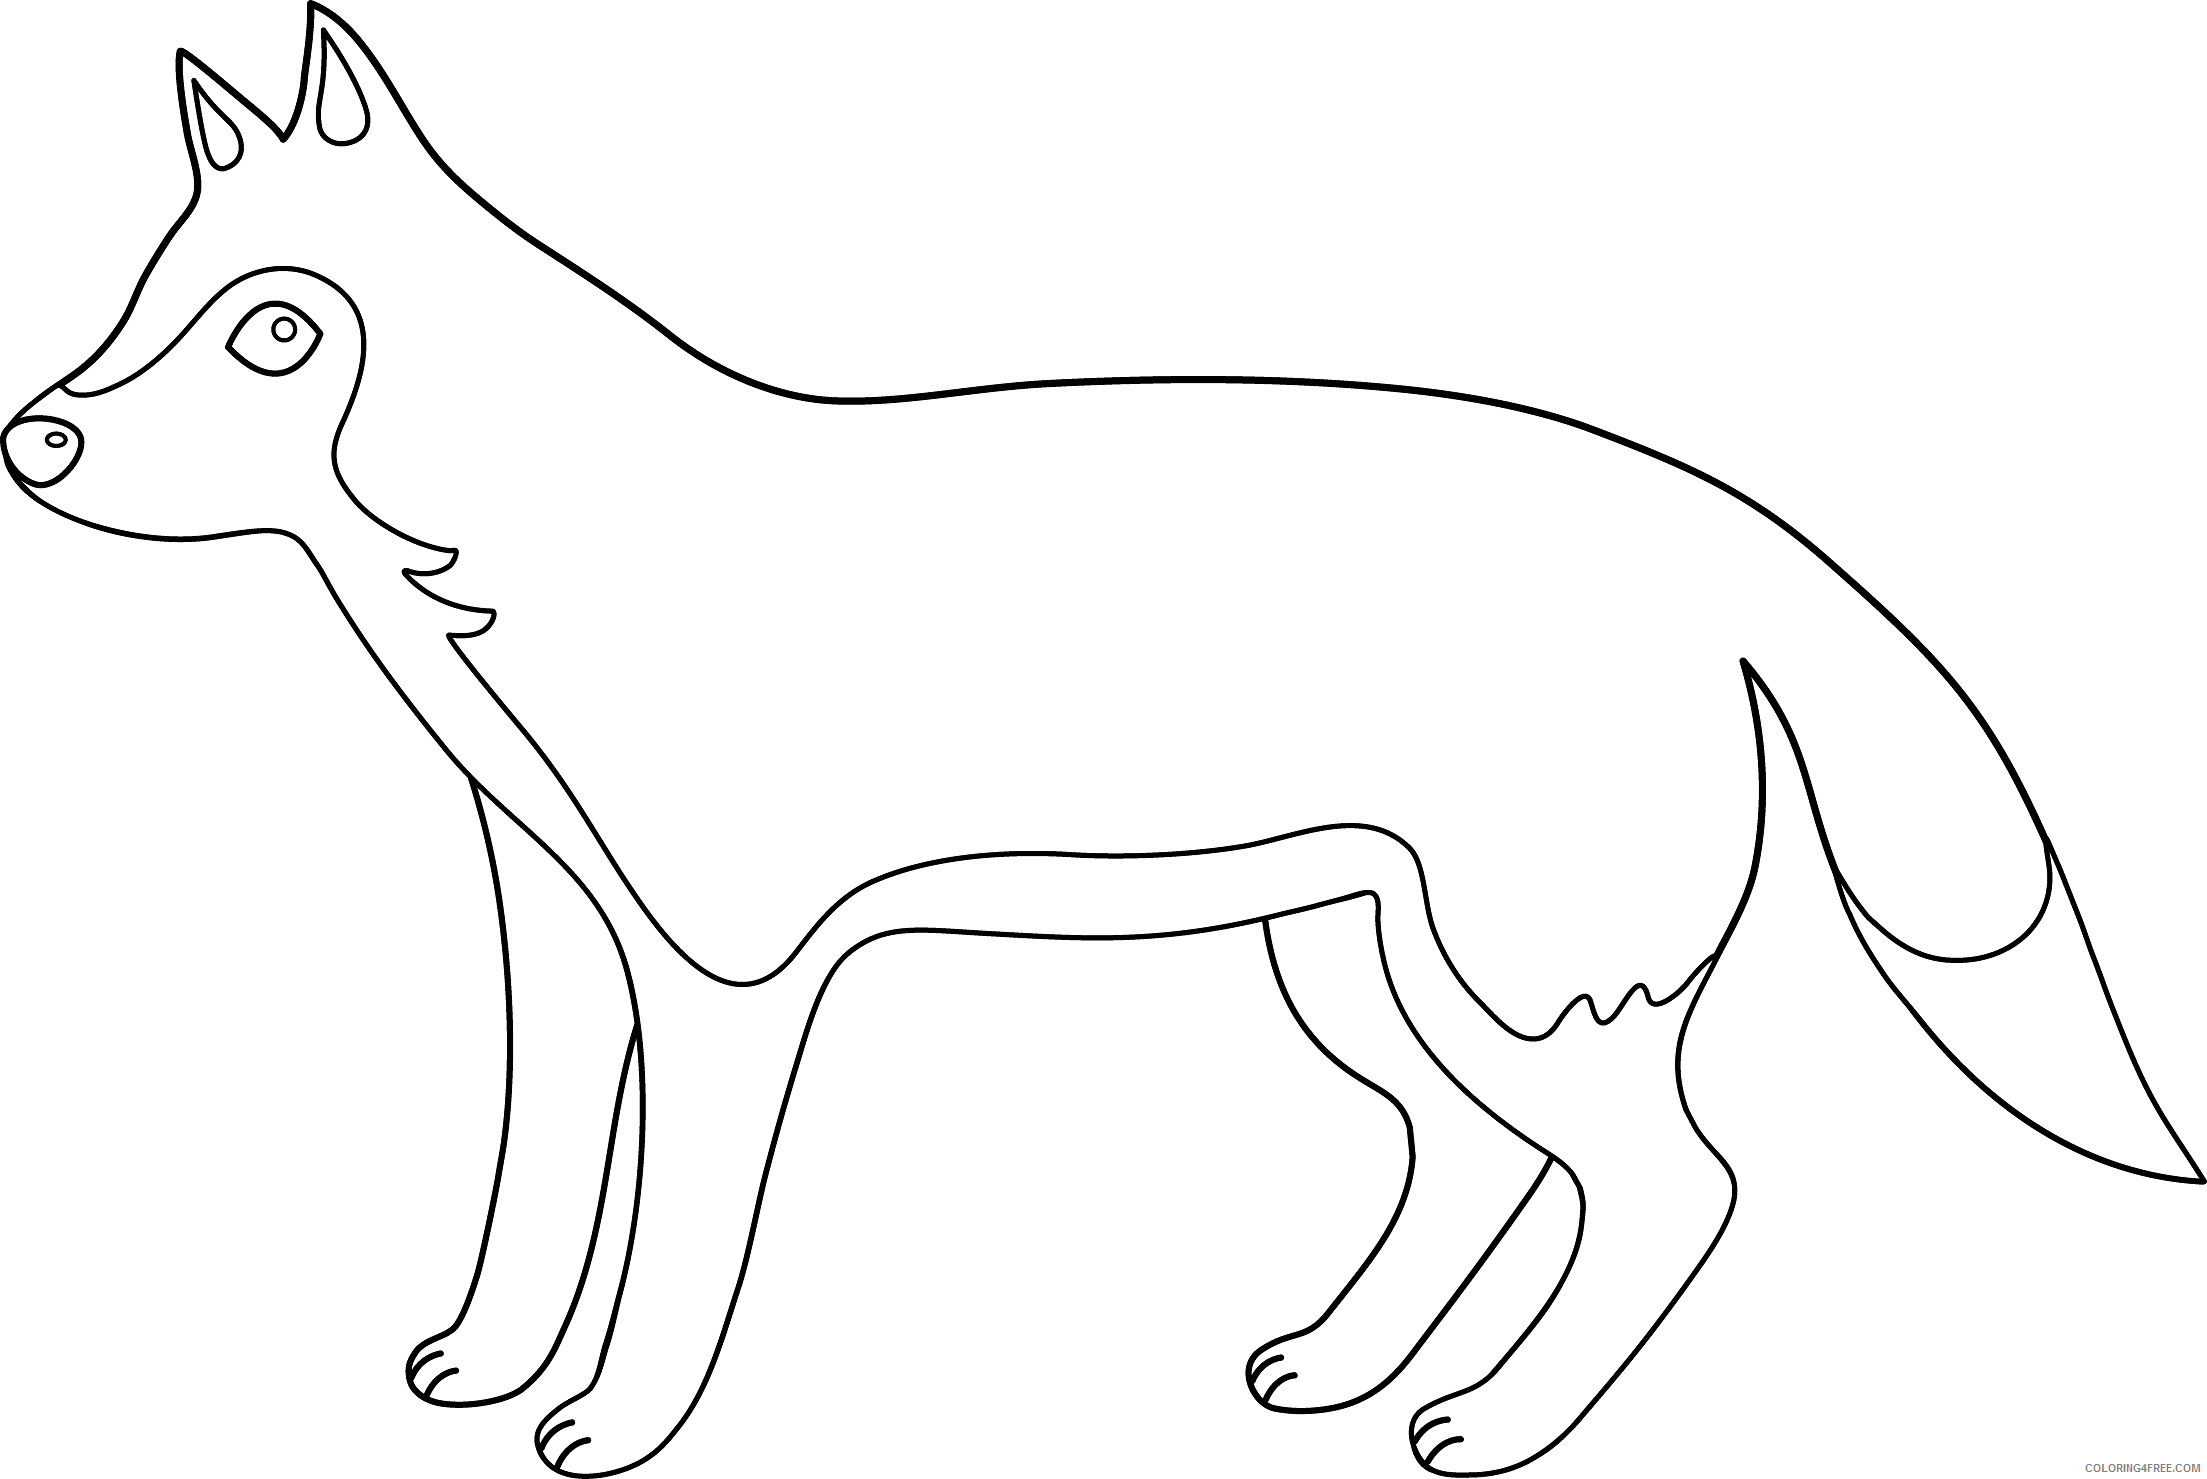 Wolf Outline Coloring Pages Colorable wolf line art free Printable Coloring4free